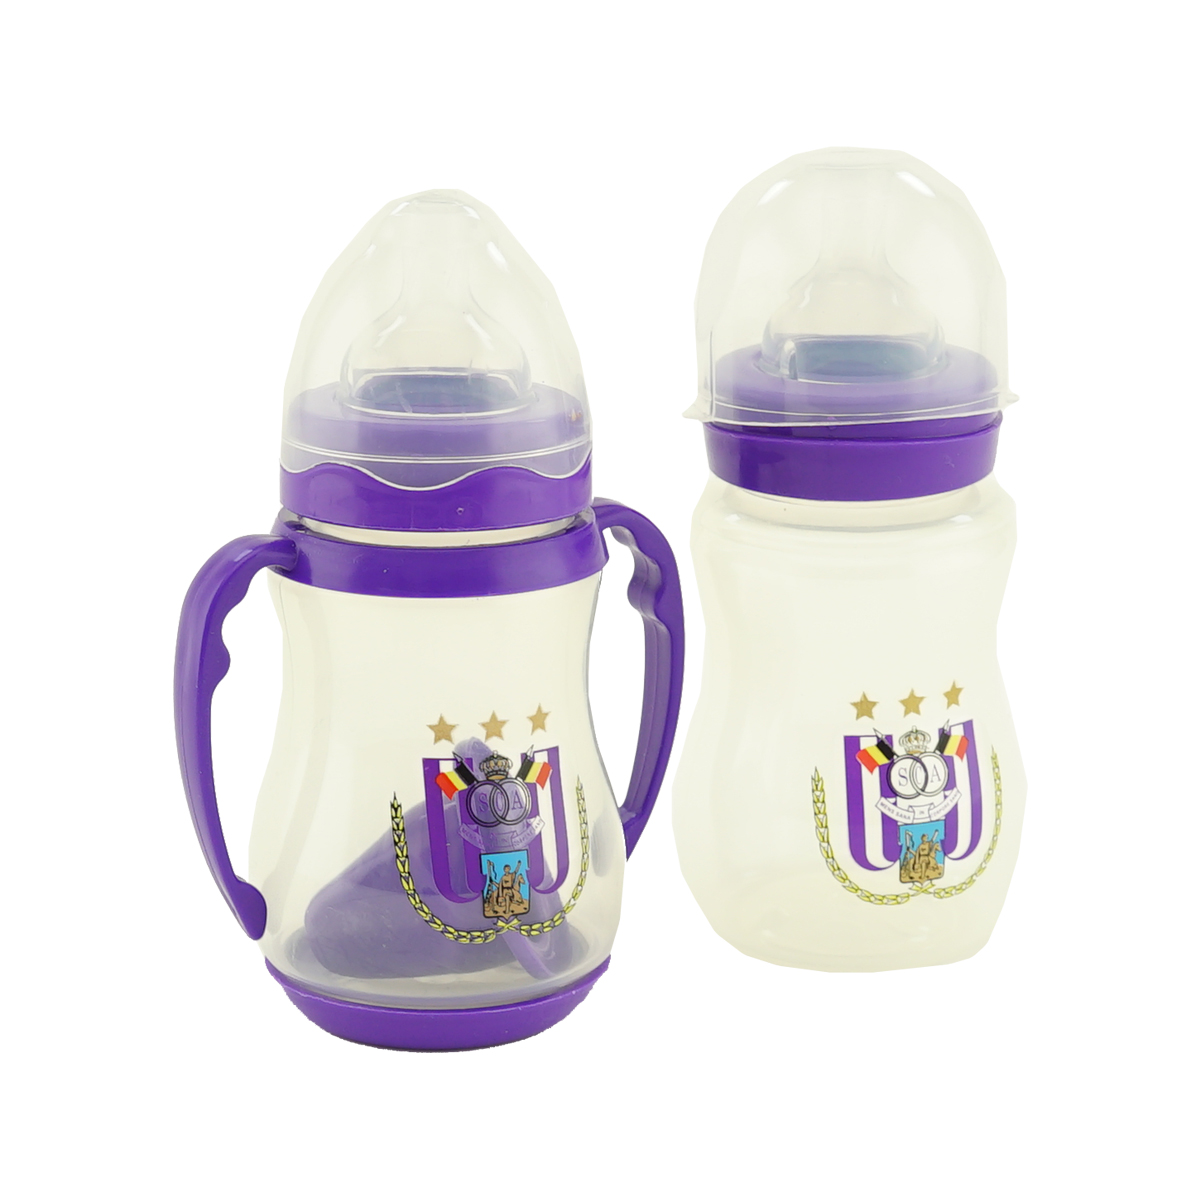 RSCA Baby Porridge Bootle And Drinking Cup Set